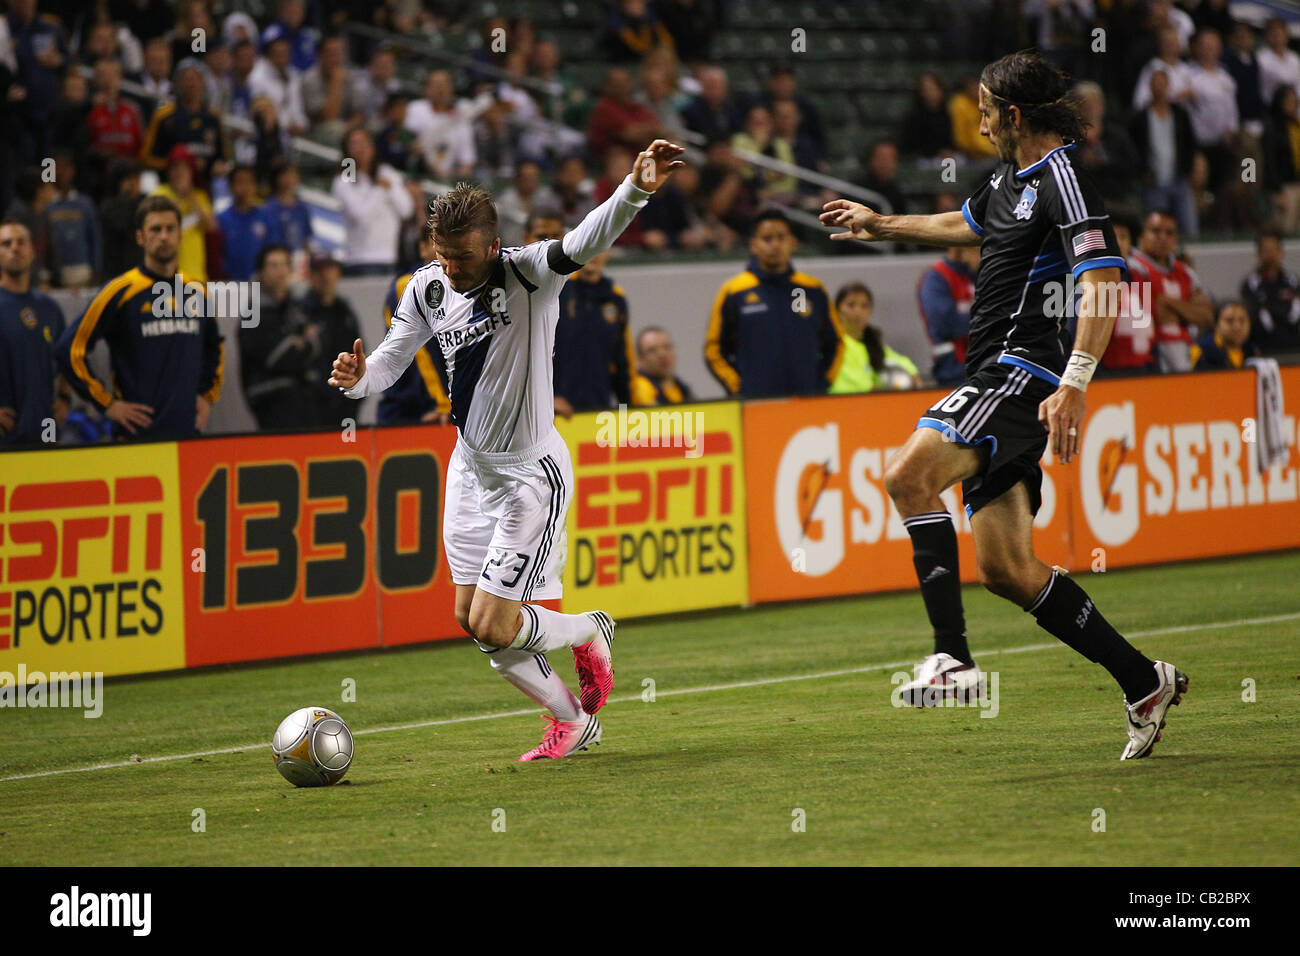 May 23, 2012 - Carson, California, United States of America - David Beckham (23) of Los Angeles Galaxy crosses the ball from the sideline against Alan Gordon (16) of San Jose Earthquakes in the second half during the Los Angeles Galaxy vs San Jose Earthquakes game at the Home Depot Center. The Earth Stock Photo